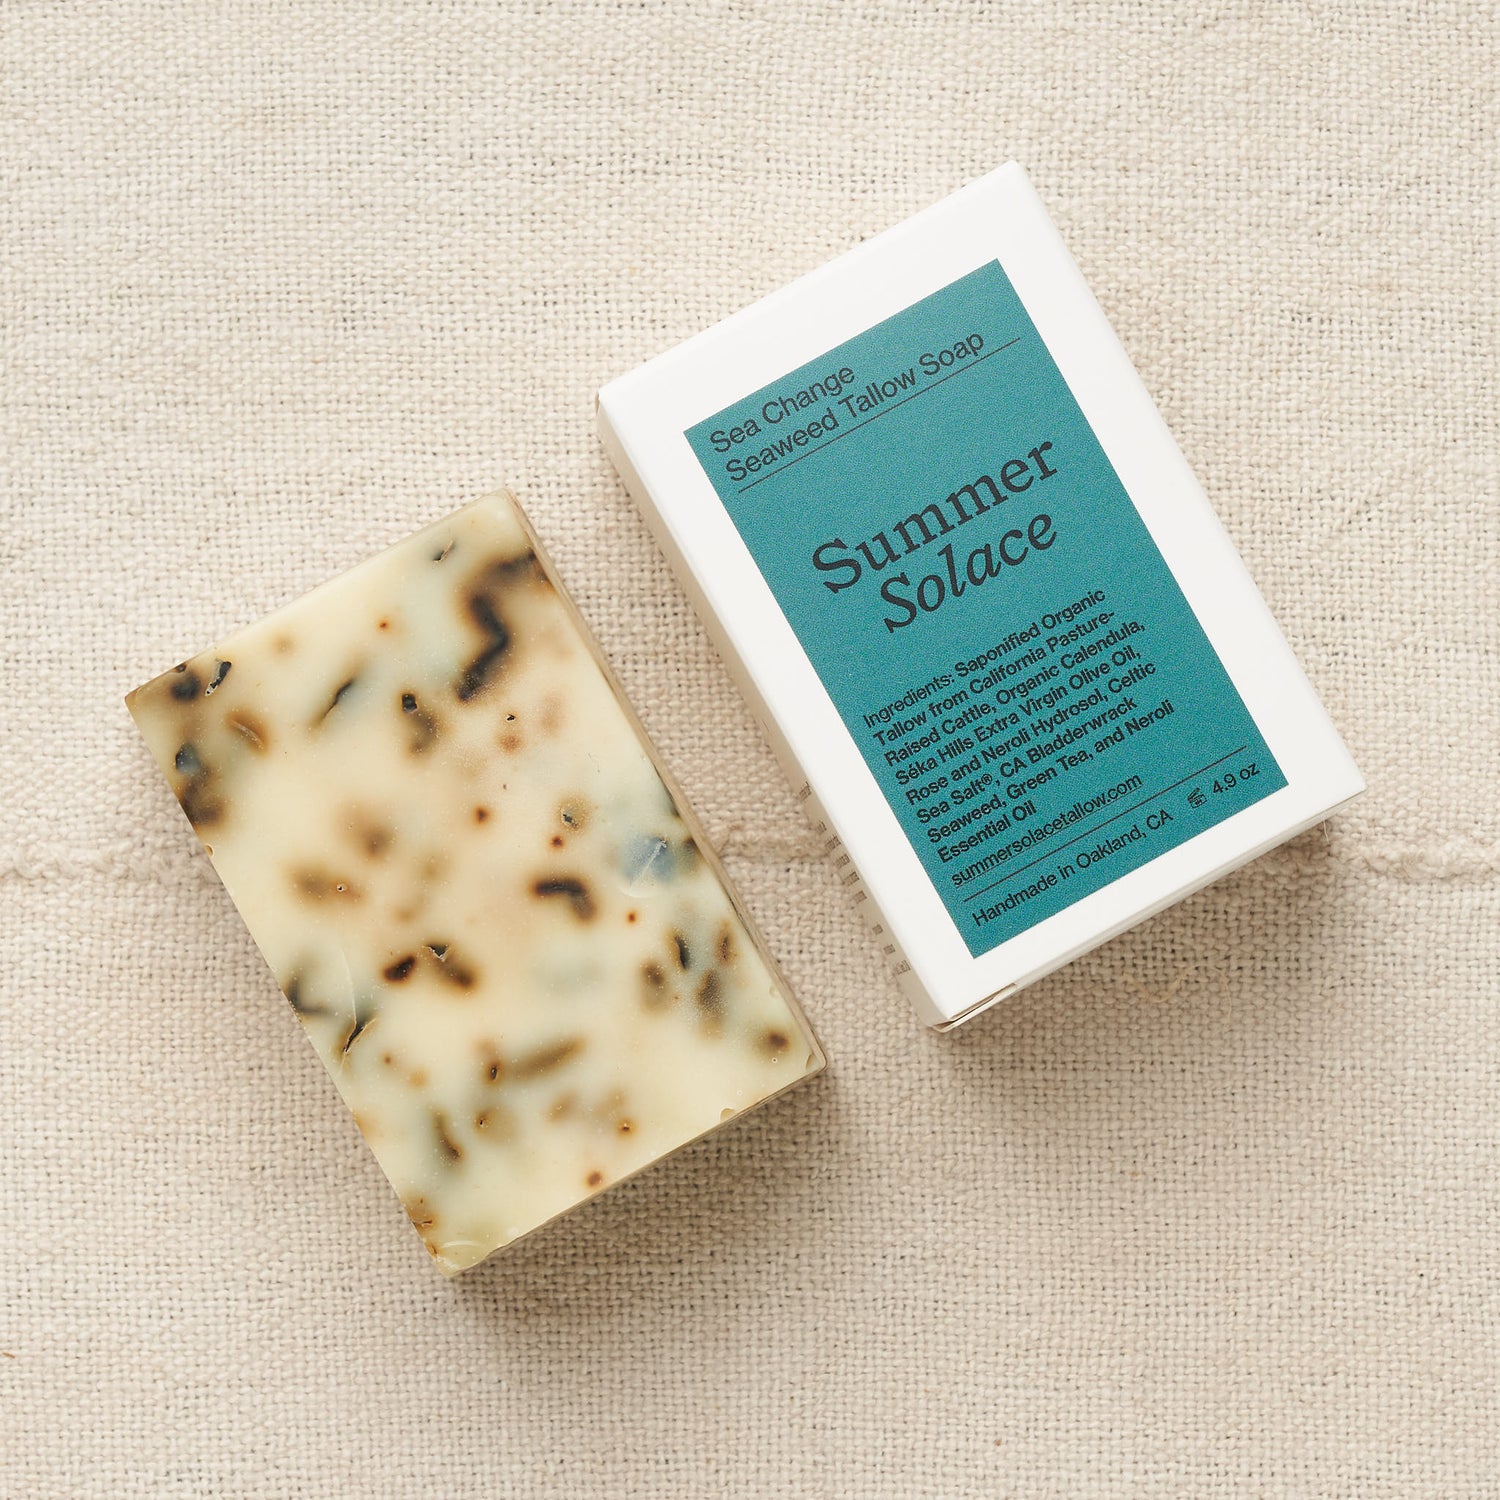 About Us and Our Handmade Soaps - Tallow Soap Company